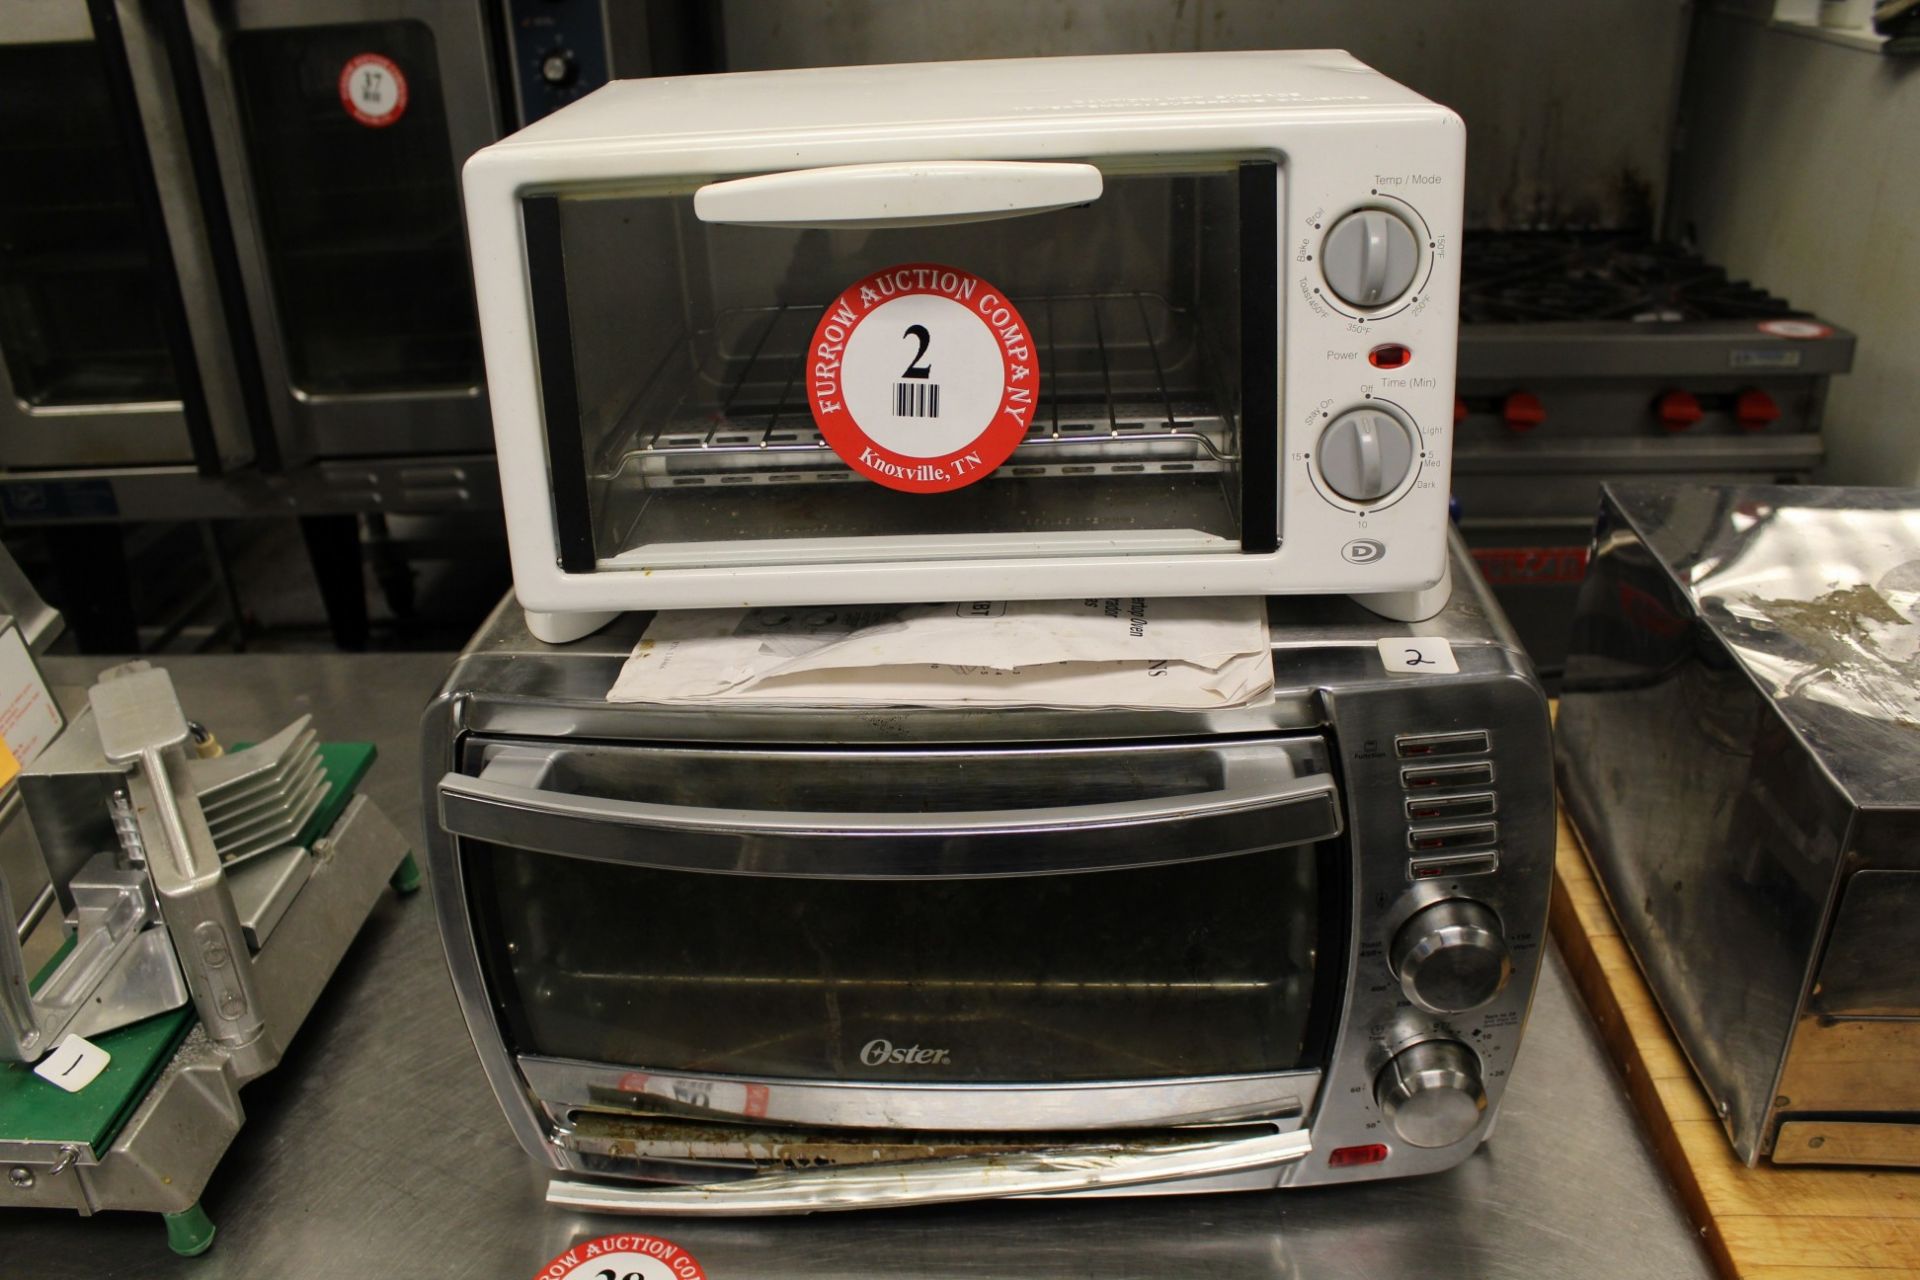 (2) Toaster Ovens, (1) Oster